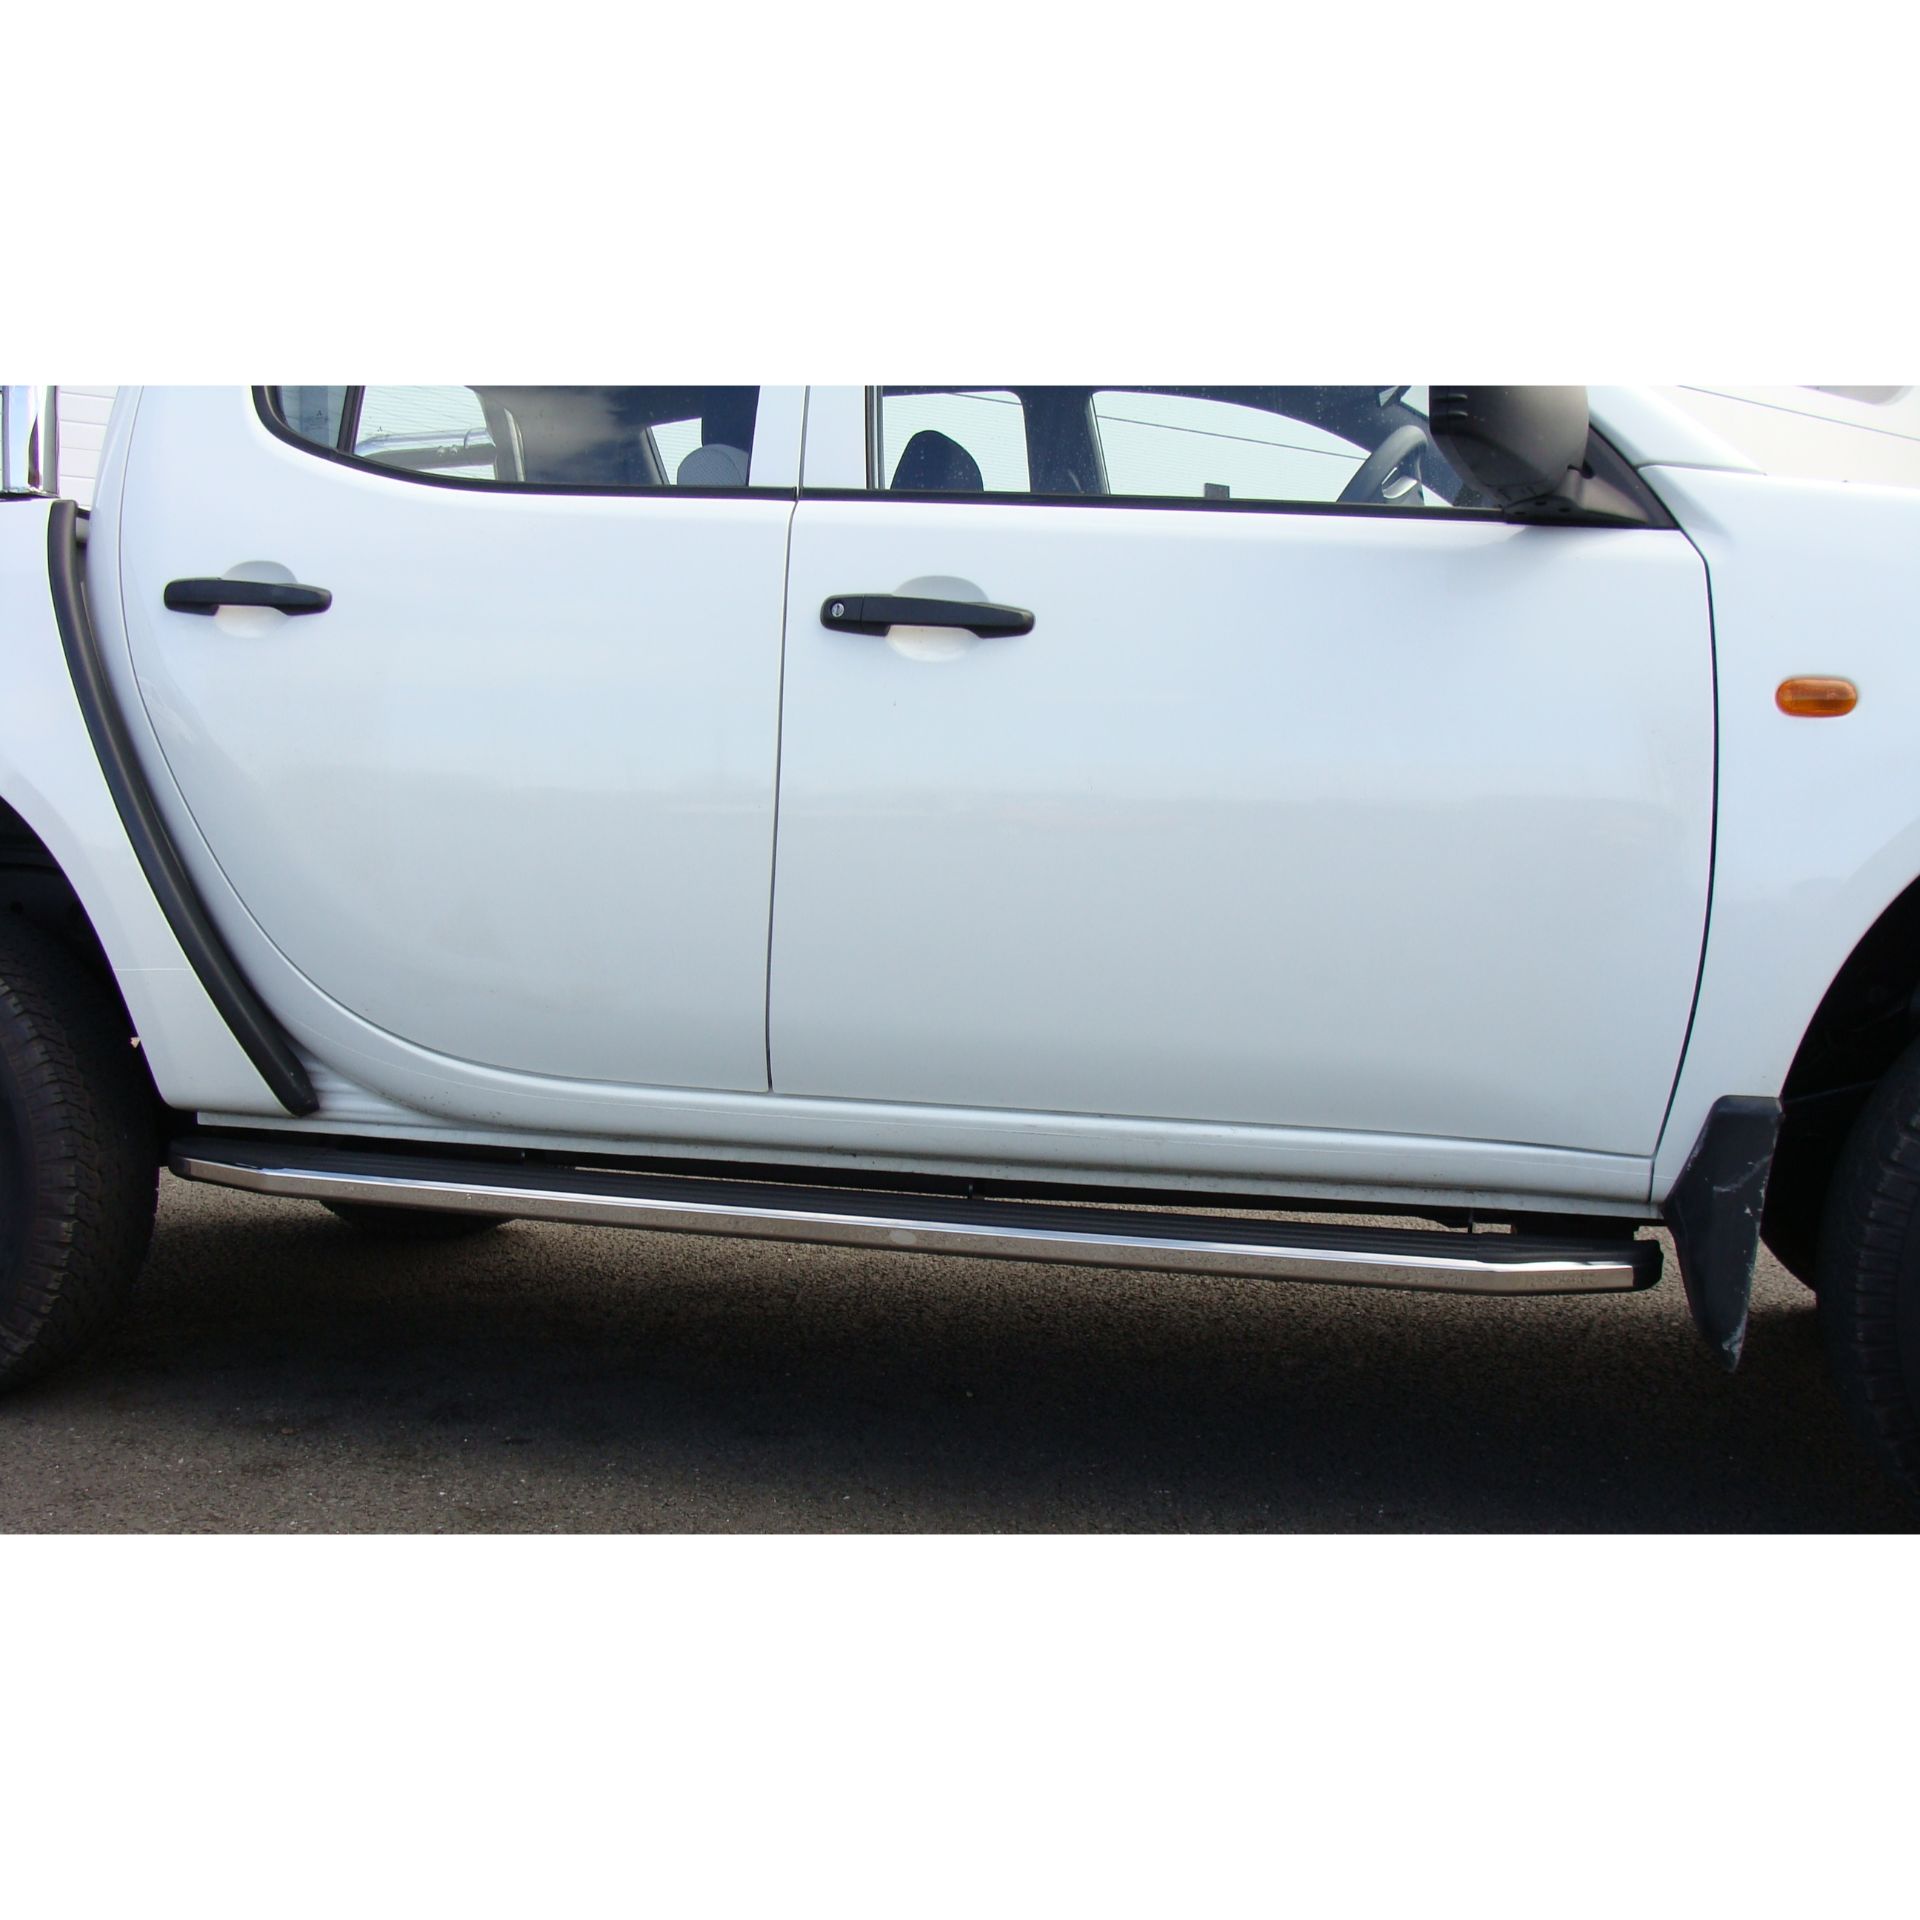 Raptor Side Steps Running Boards for Mitsubishi L200 Double Cab 2005-2015 -  - sold by Direct4x4